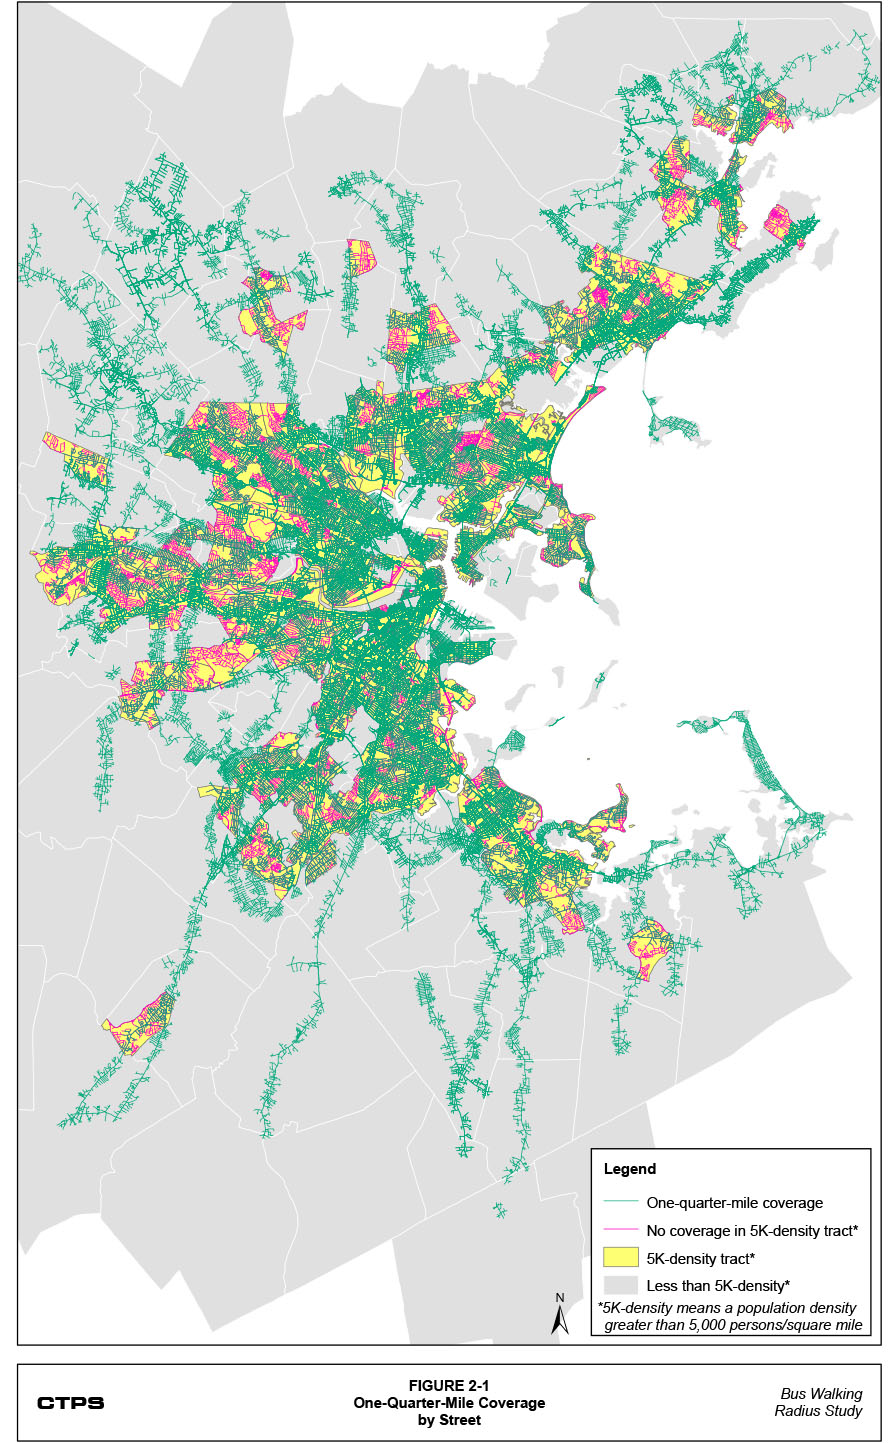 Figure 2-1: One-Quarter-Mile Coverage by Street. This is a map that shows two categories of street miles: 1) the street miles in the one-quarter-mile coverage for the entire MBTA bus and rapid transit systems; and 2) the street miles within census tracts with a population density greater than 5,000 persons per square mile. The map also shows where these two categories of street miles do and do not overlap.